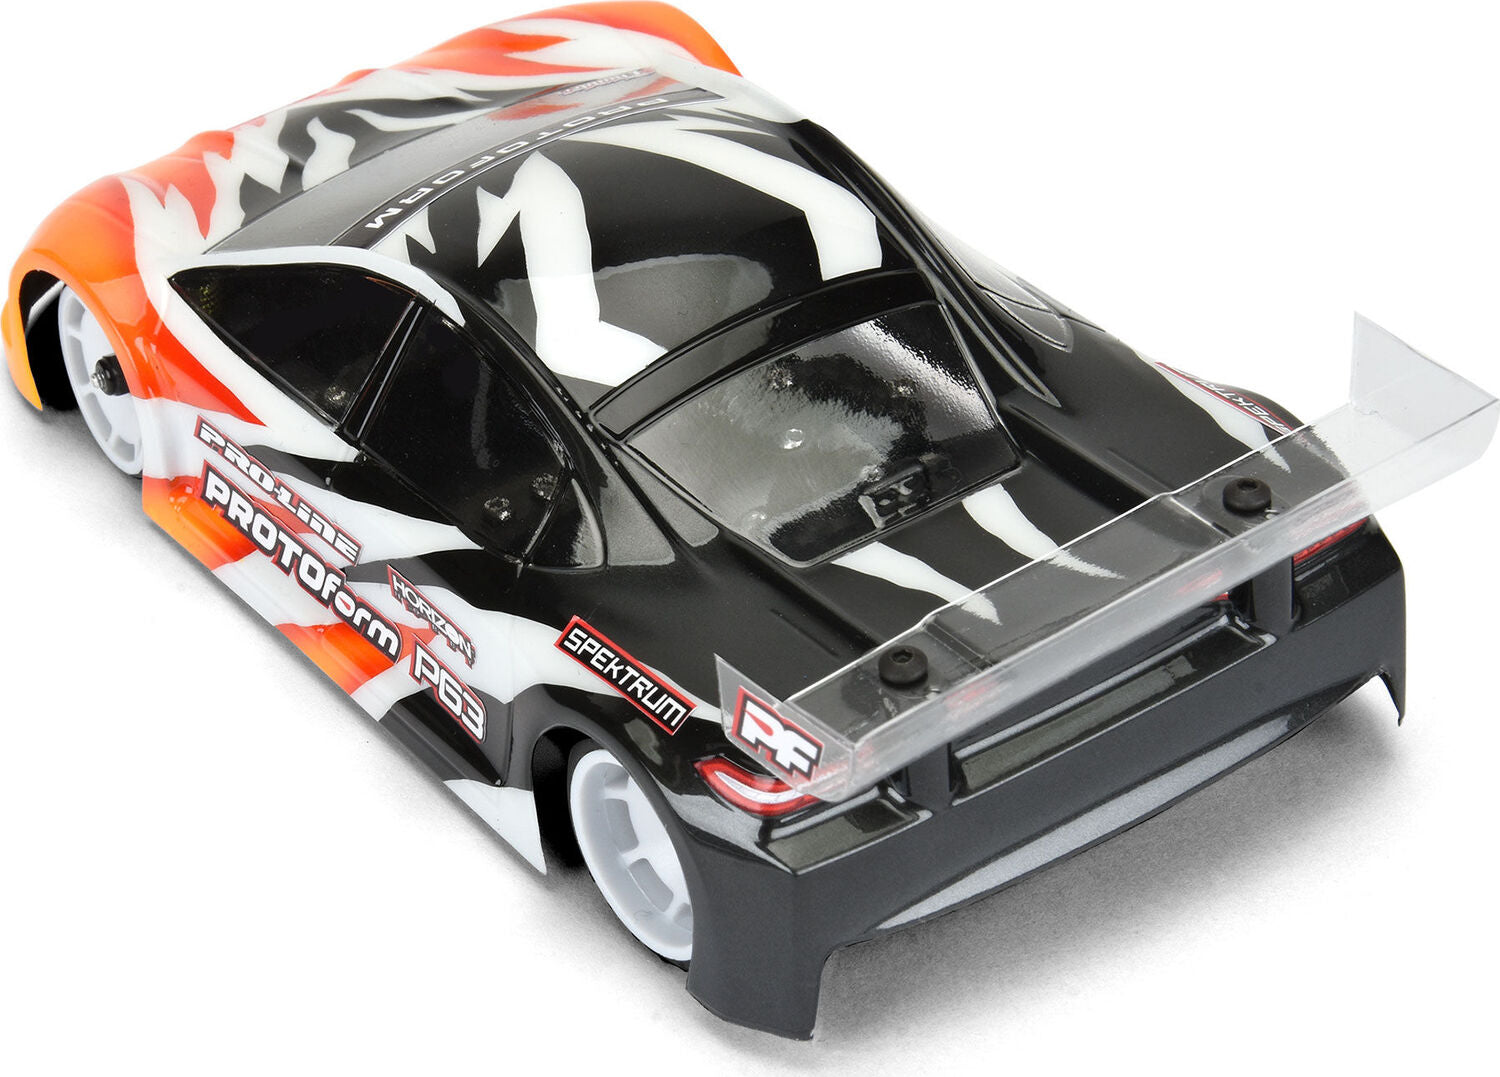 1/28 P63 Light Weight Clear Body: Mini-Z & 1/28 Chassis (98mm WB)